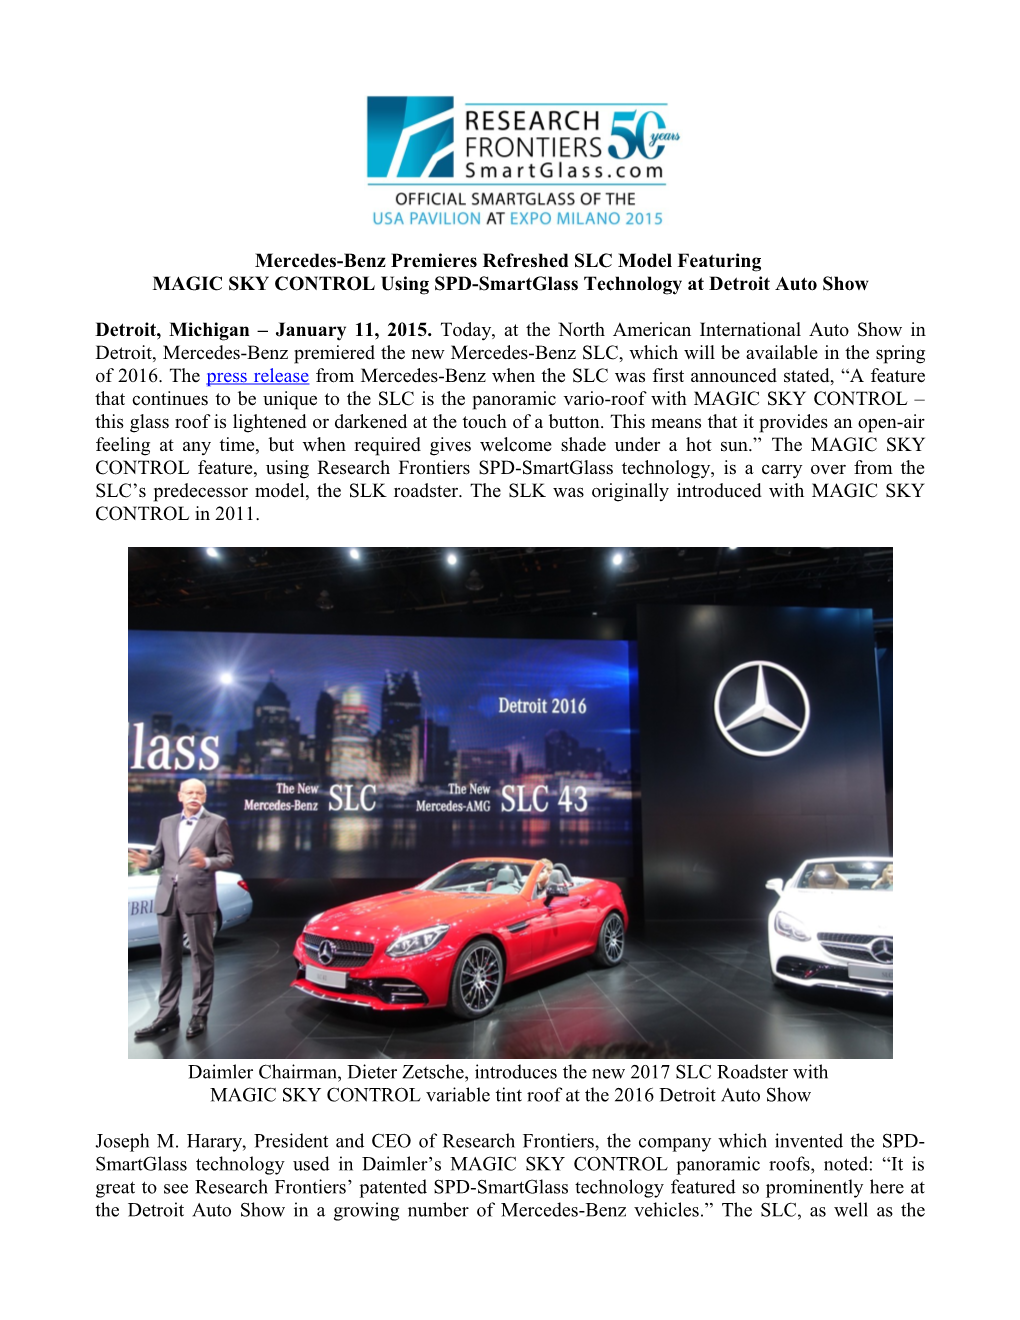 Mercedes-Benz Premieres Refreshed SLC Model Featuring